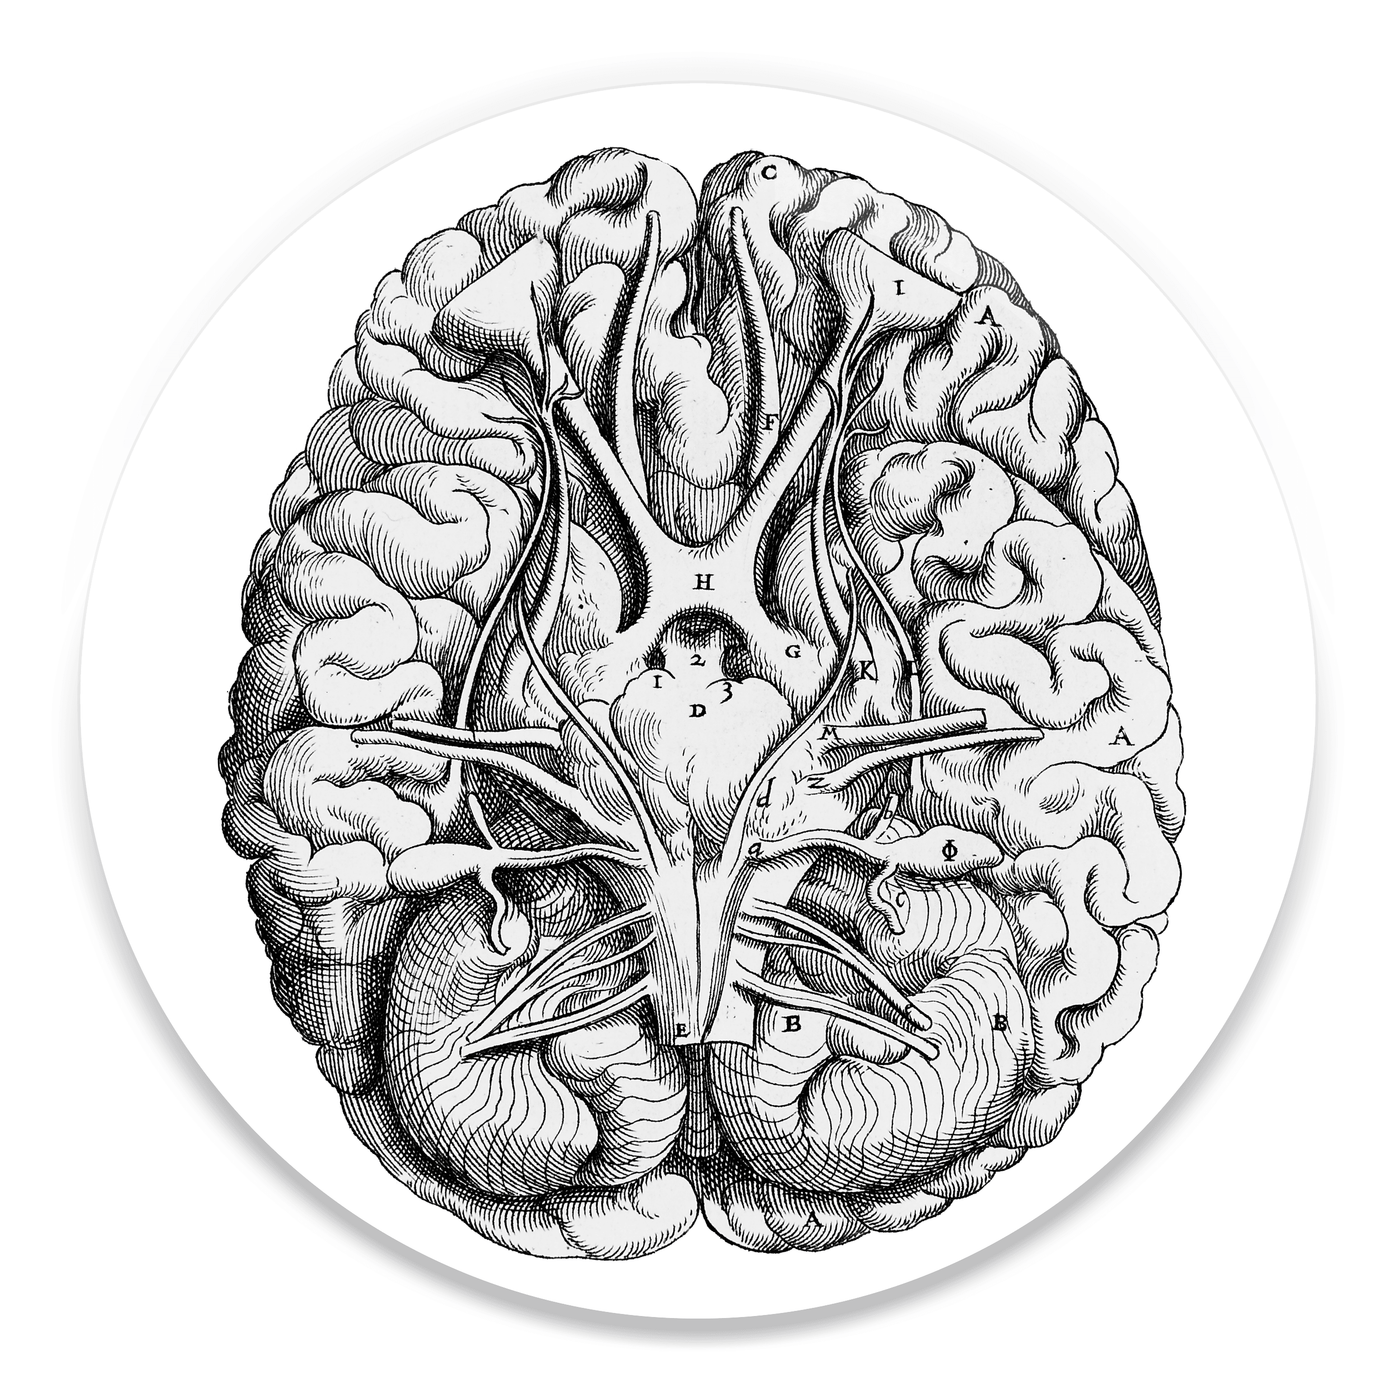 2.25 inch round colorful magnet with image of an anatomical brain